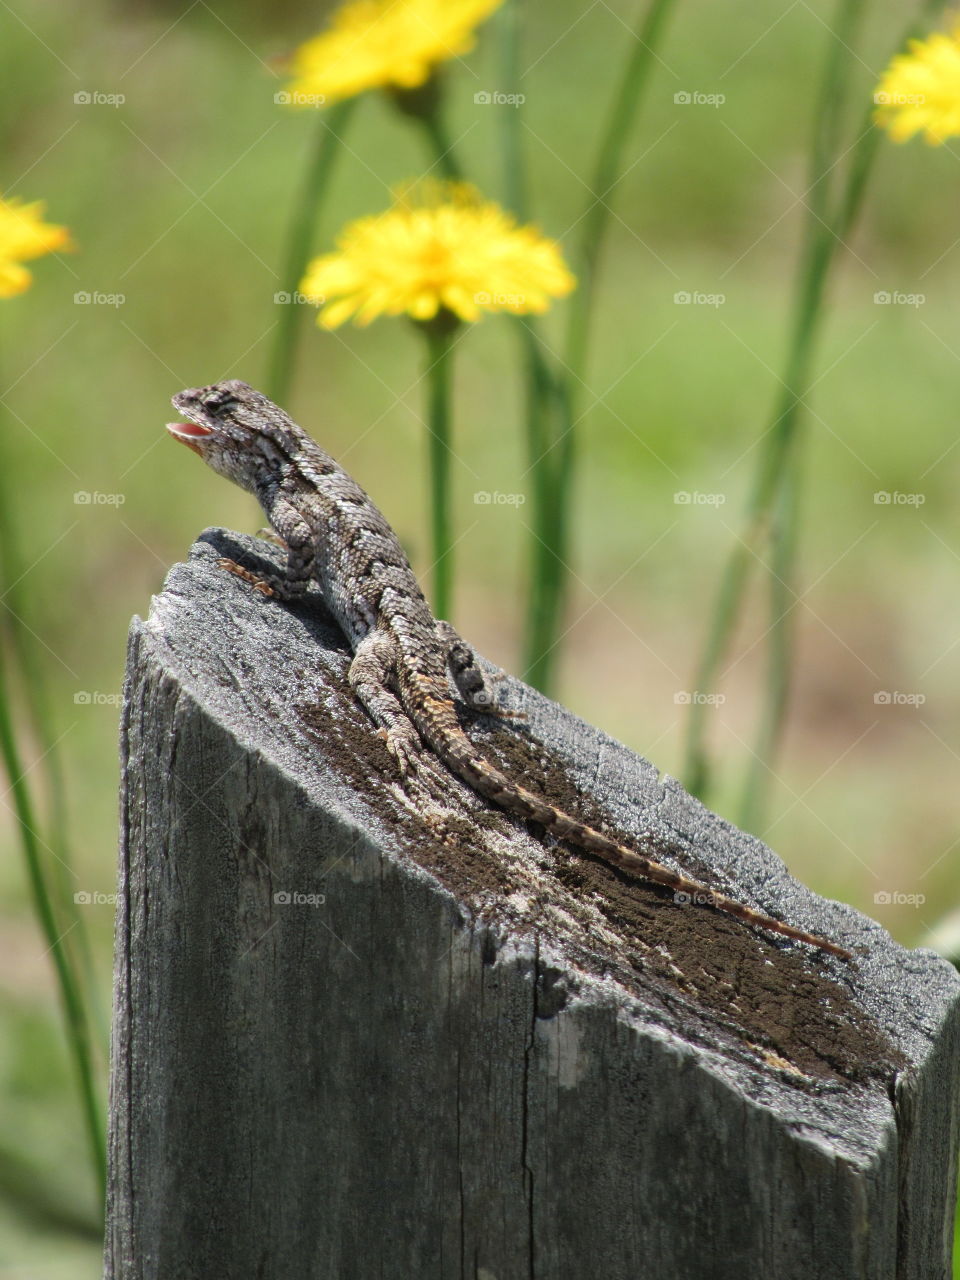 Eastern fence lizard basking in the sunshine with a yellow flower in the background and his mouth open